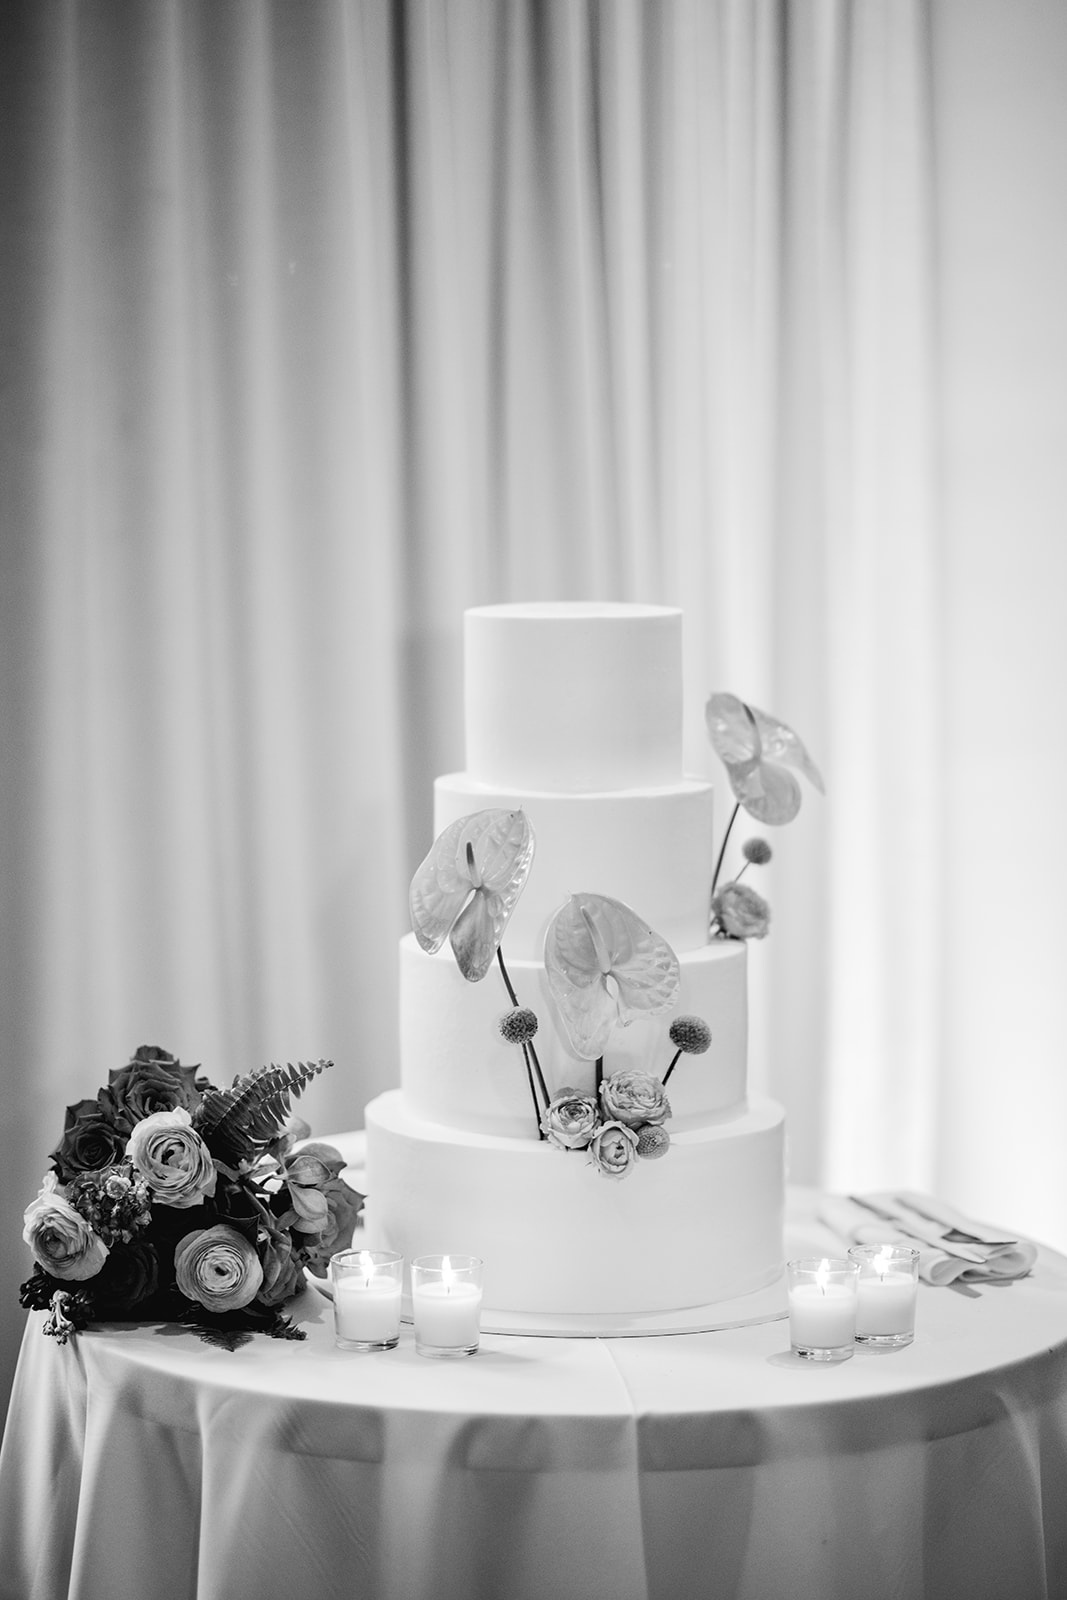 Black and white detail of wedding cake at reception hall at Mayfair House Hotel & Garden in Miami on wedding day.